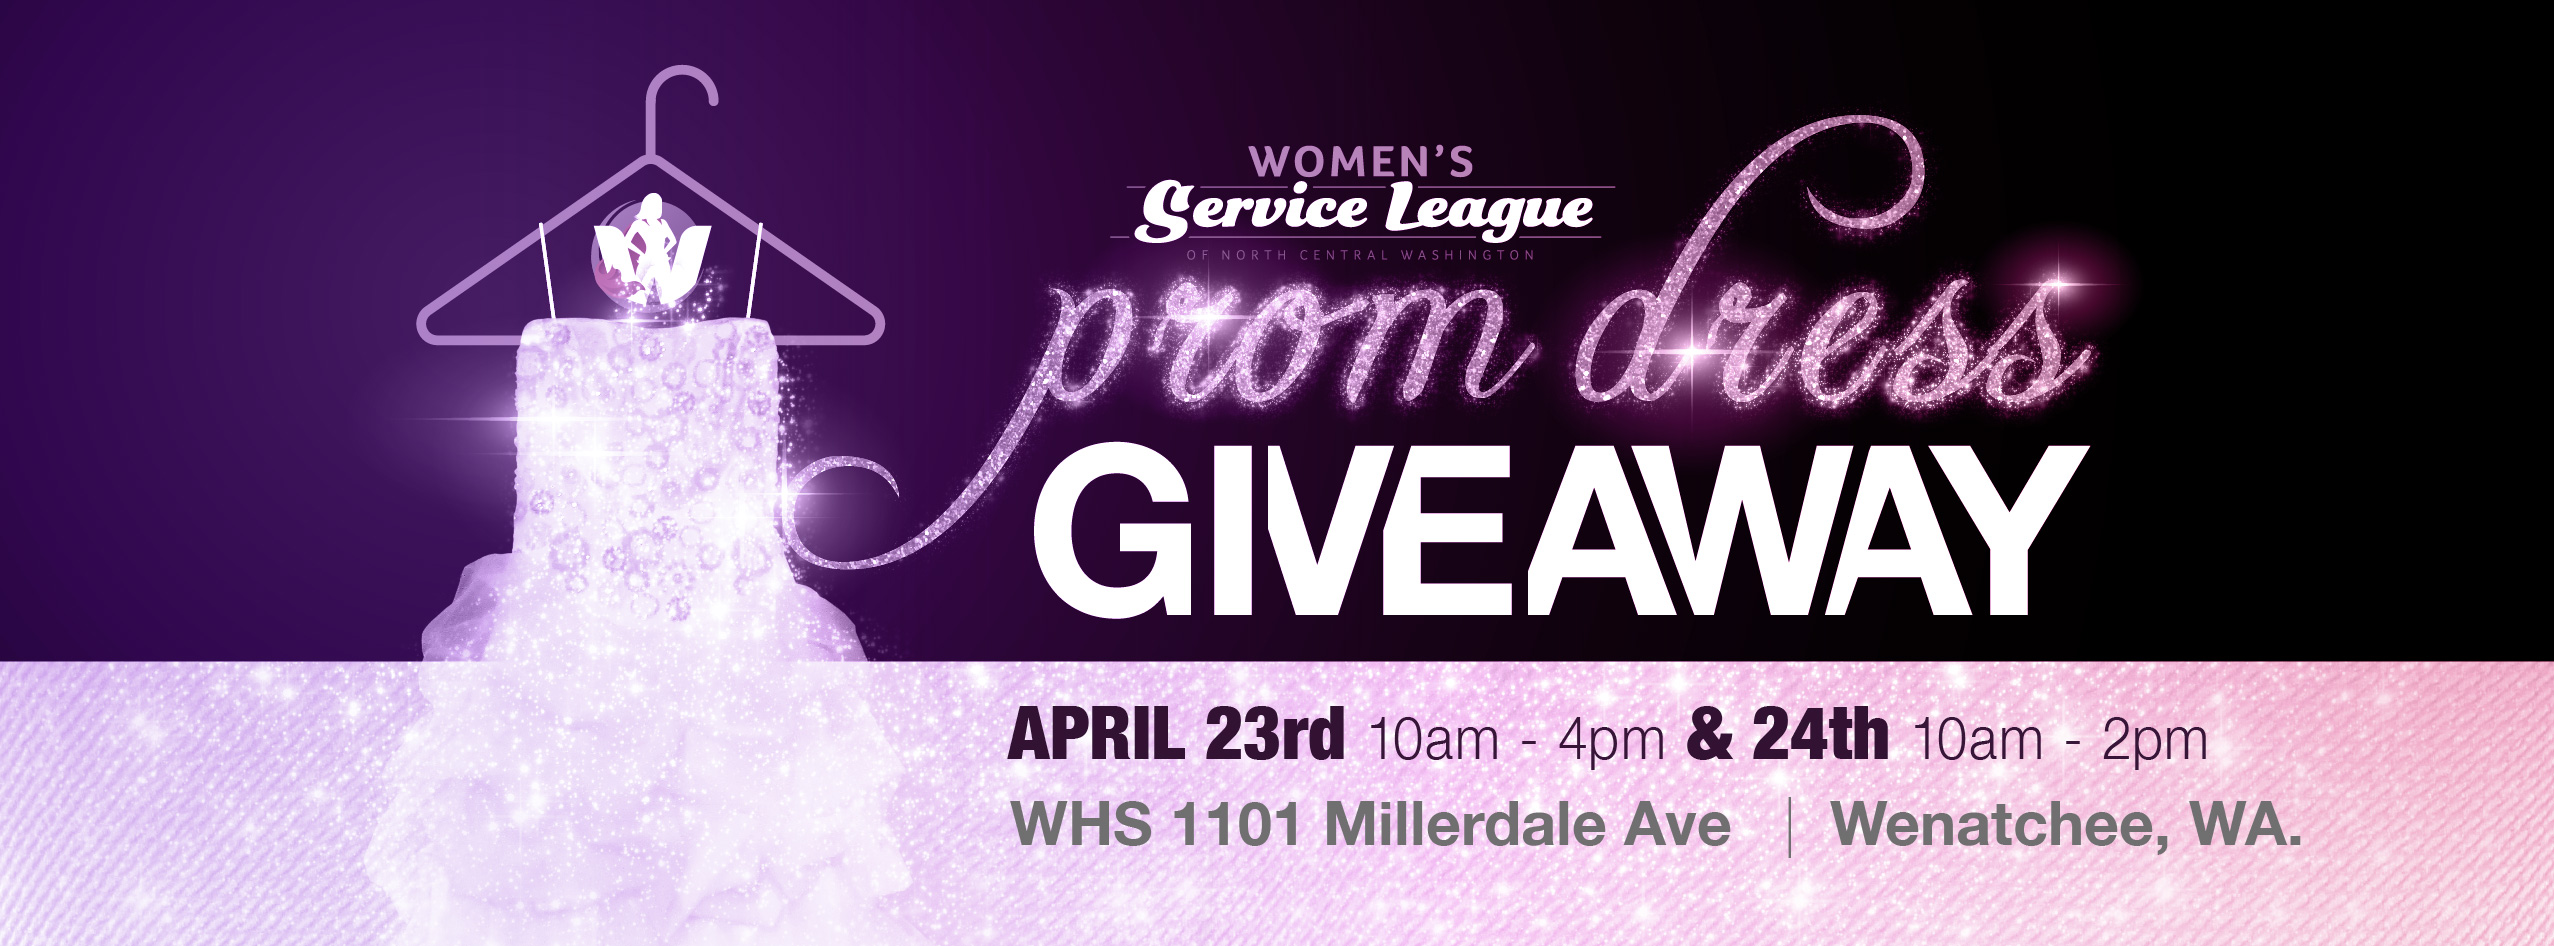 <h1 class="tribe-events-single-event-title">Prom Dress Giveaway</h1>